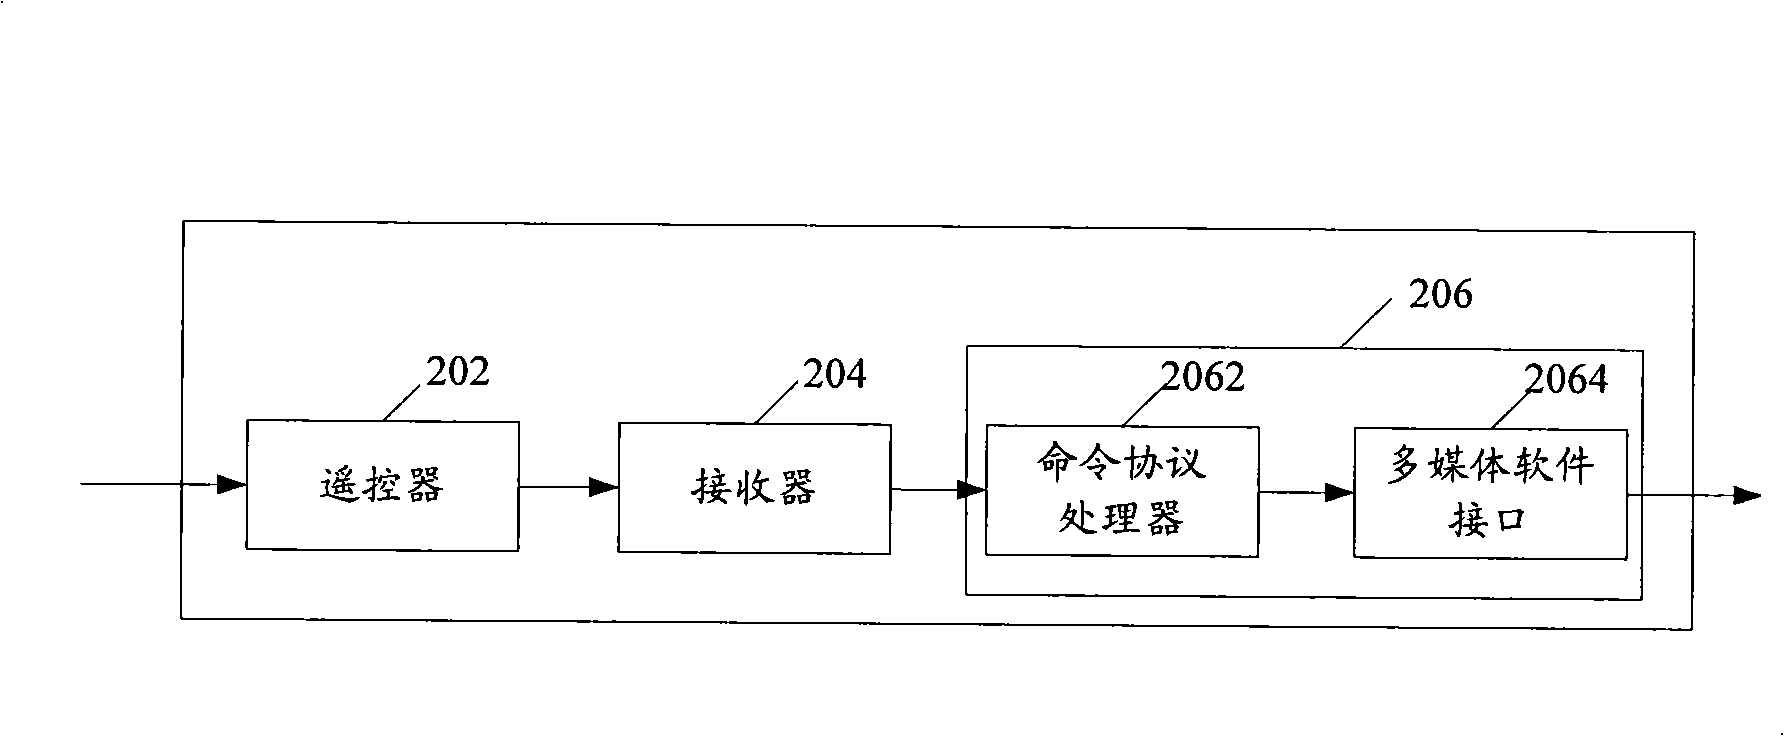 Long-range control system and method of multimedia software